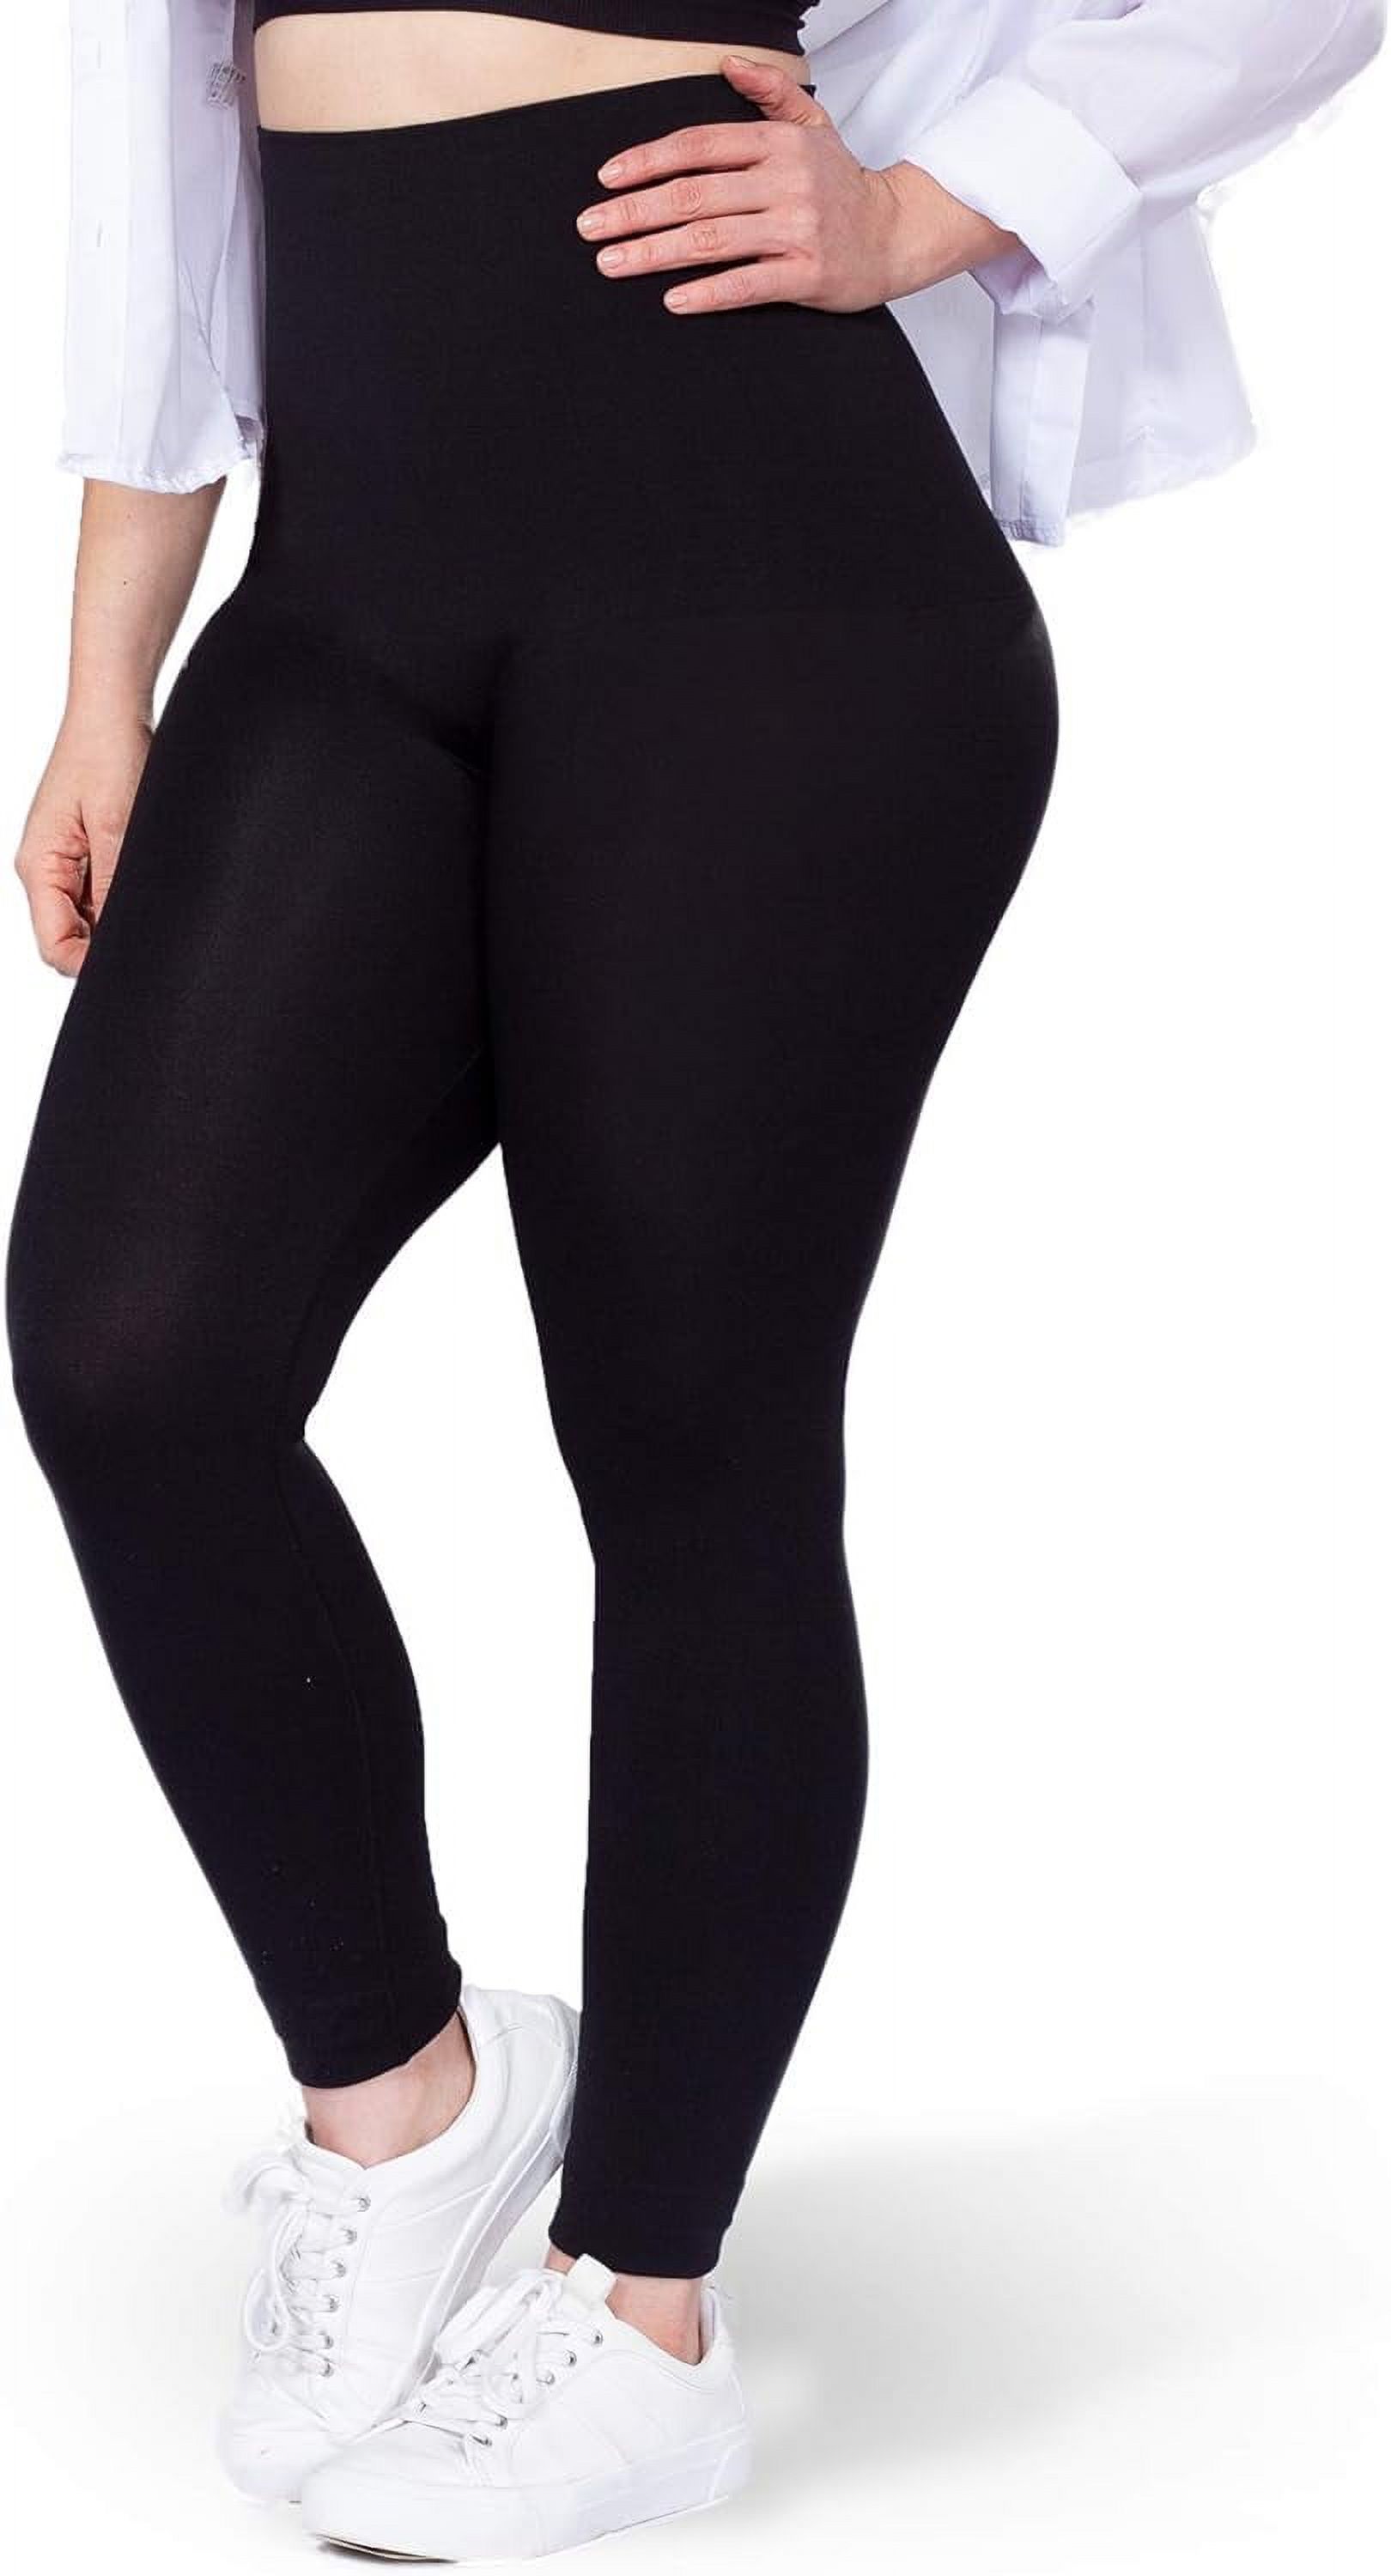 Shapermint Women’s High Waisted Shaping Leggings - image 1 of 6